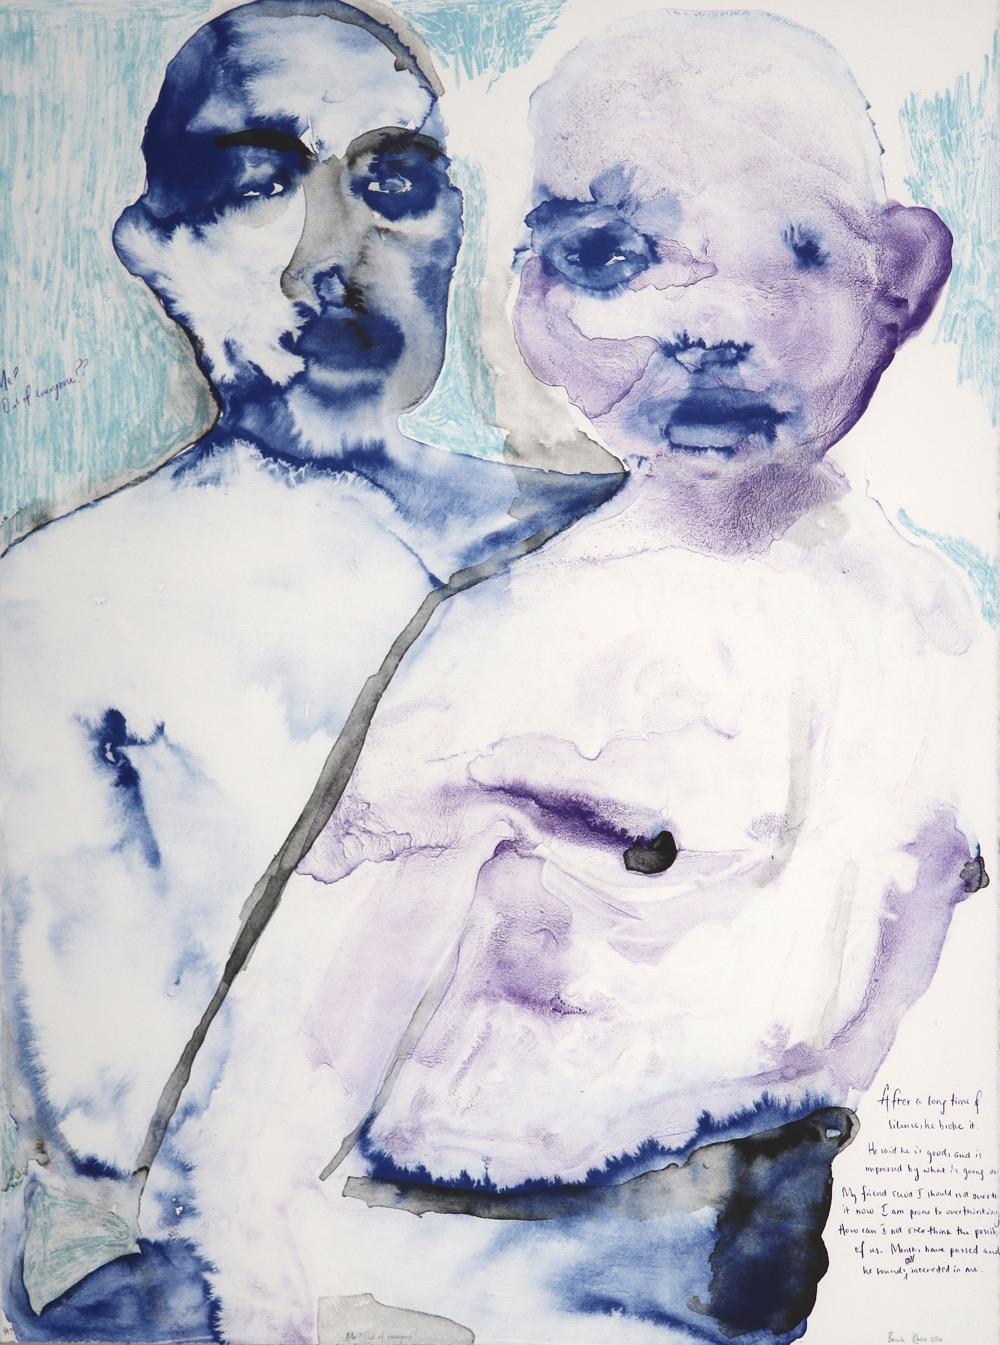 Two men standing alongside each other, loosely painted in blue and purple tones with handwritten text